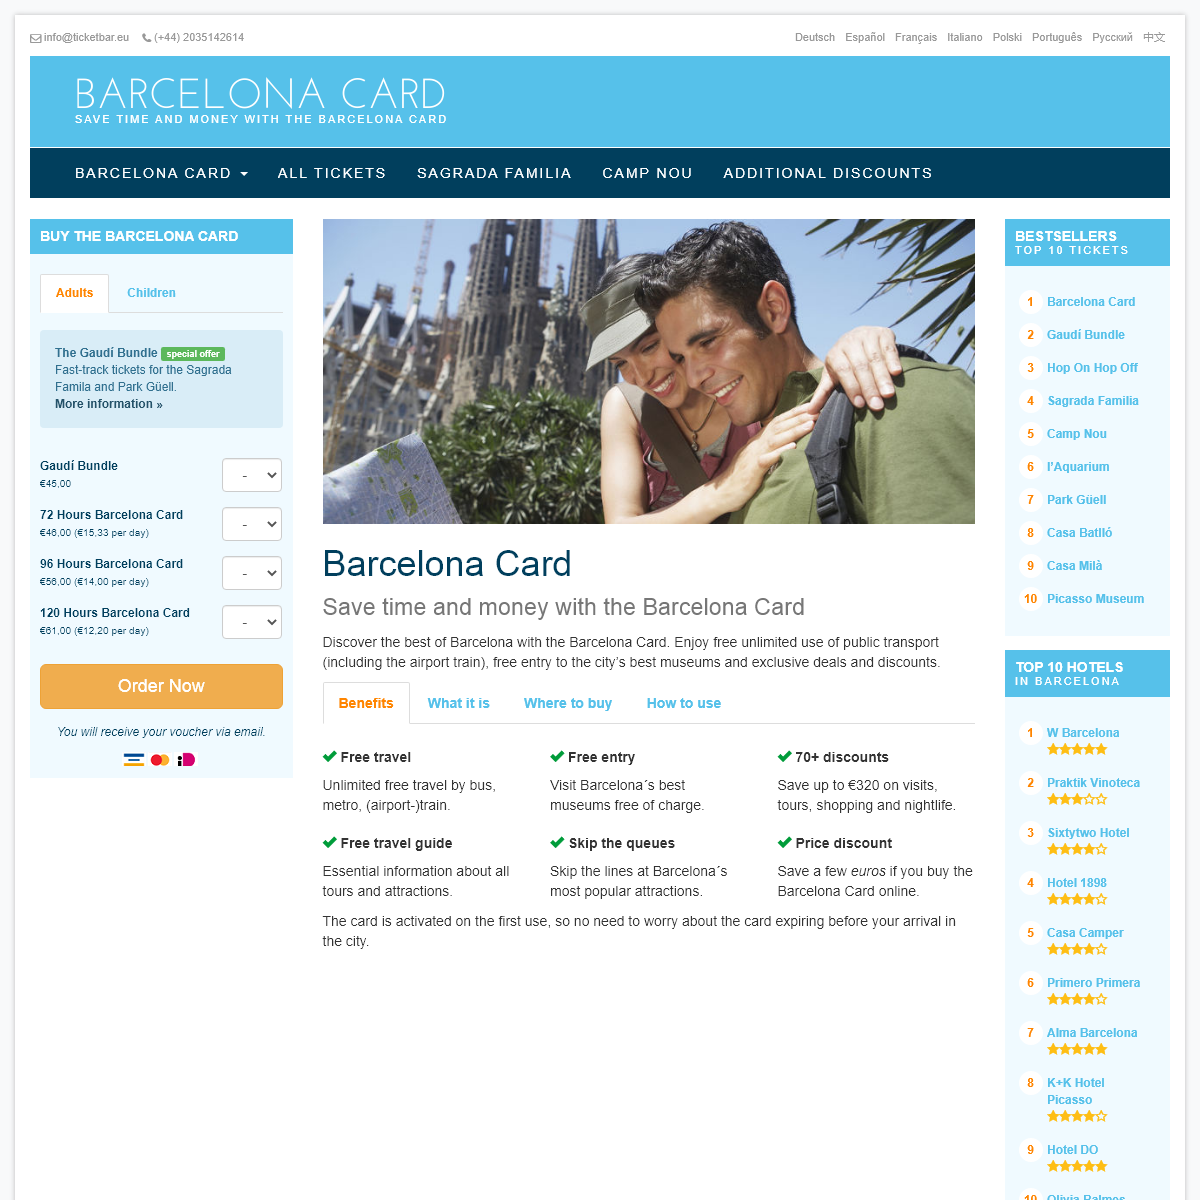 A complete backup of barcelonacard.org